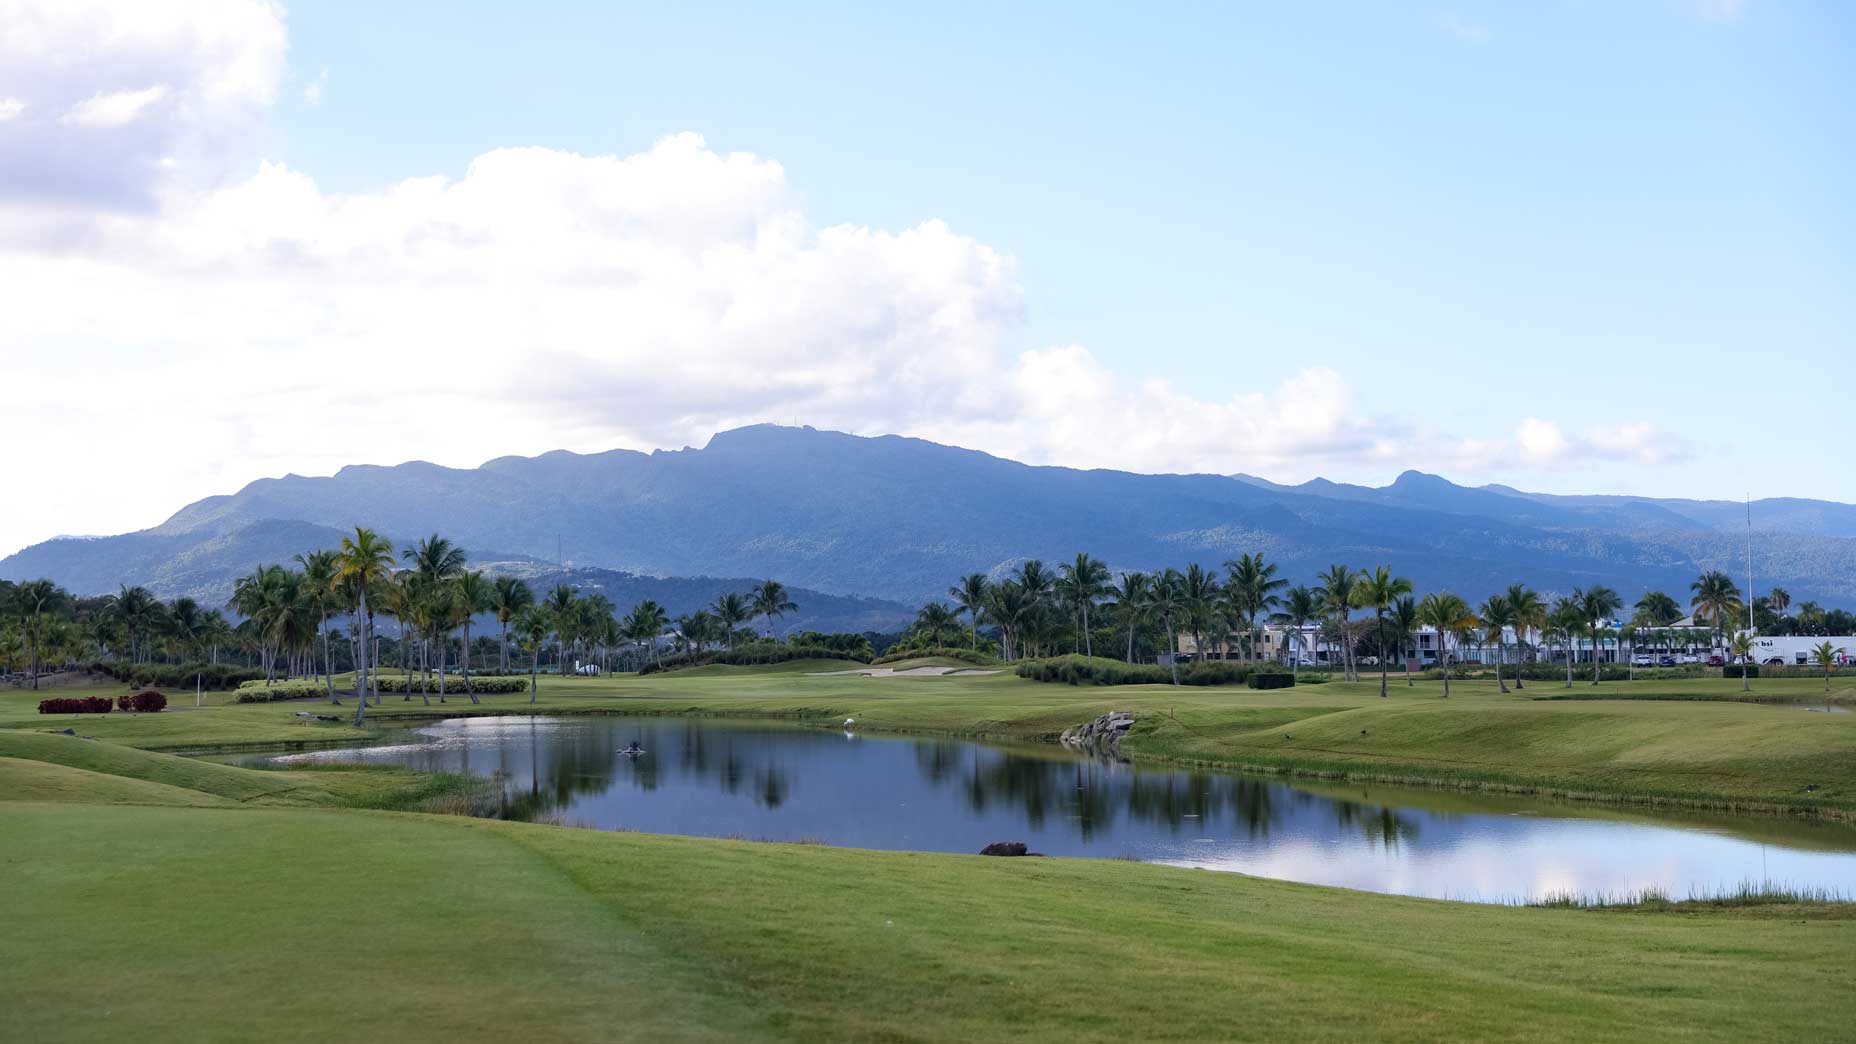 General view of the front nine at Grand Reserve Golf Club on March 01, 2023 in Rio Grande, Puerto Rico.